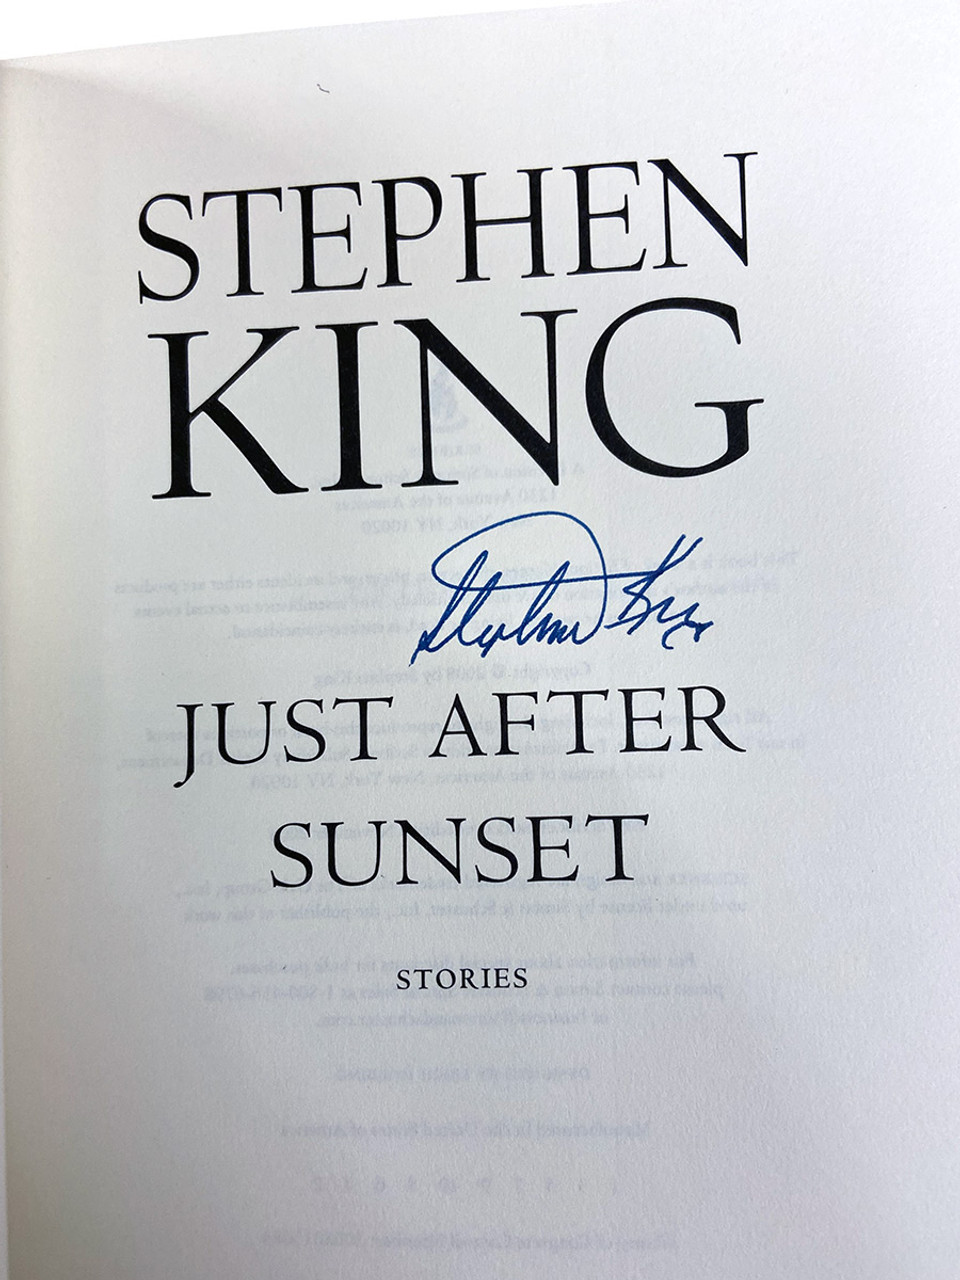 Stephen King "Just After Sunset" Signed First Edition, Book Signing Ticket + Flyer , Slipcased w/COA  [Very Fine/Very Fine]